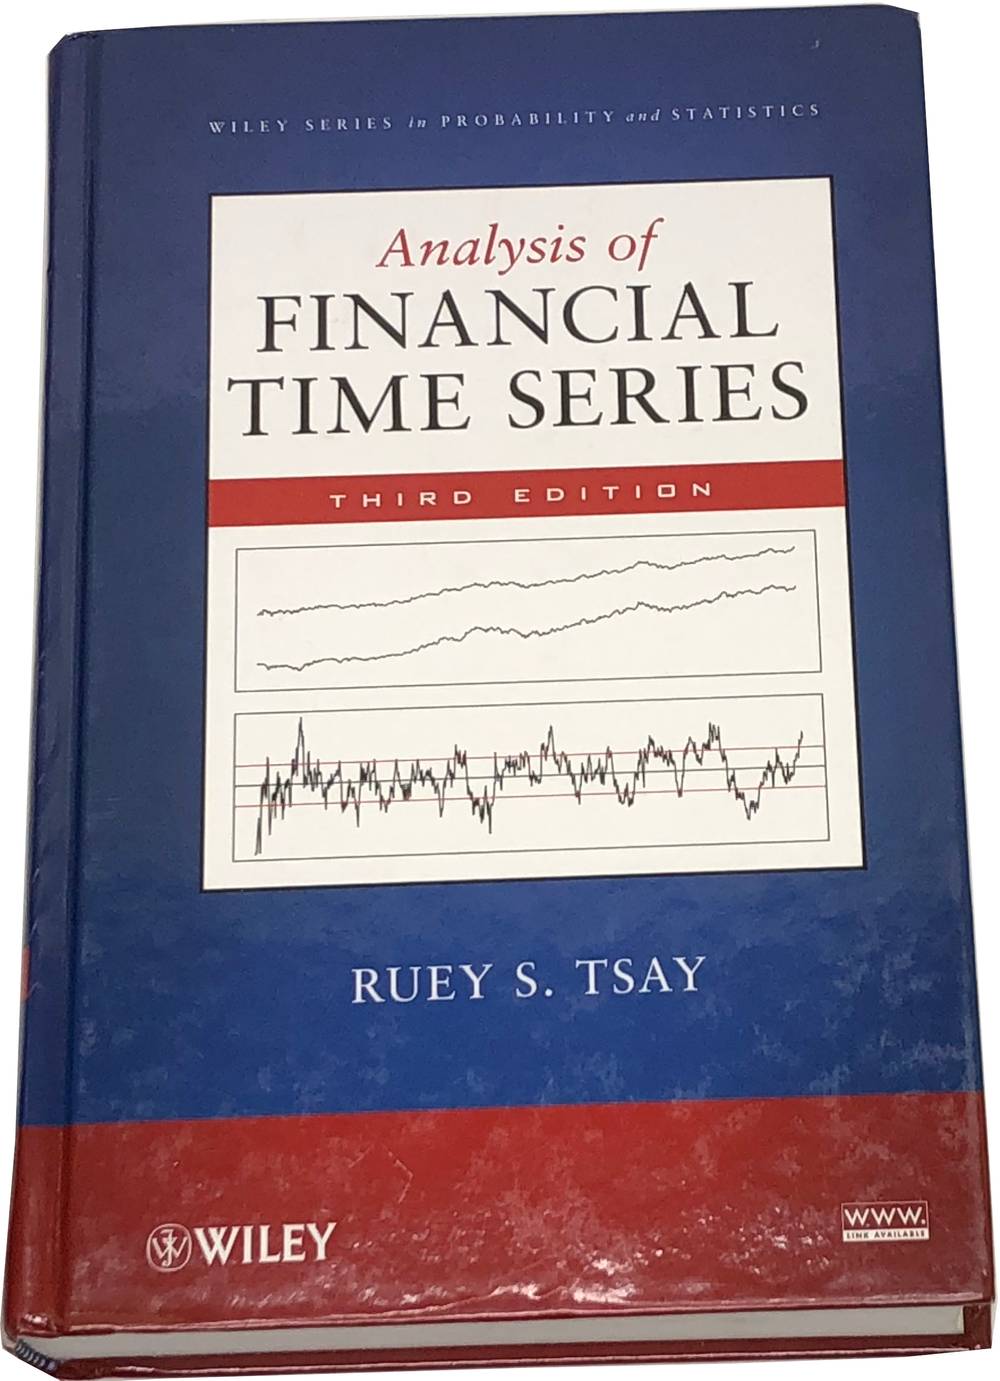 Book image of Analysis of Financial Time Series.